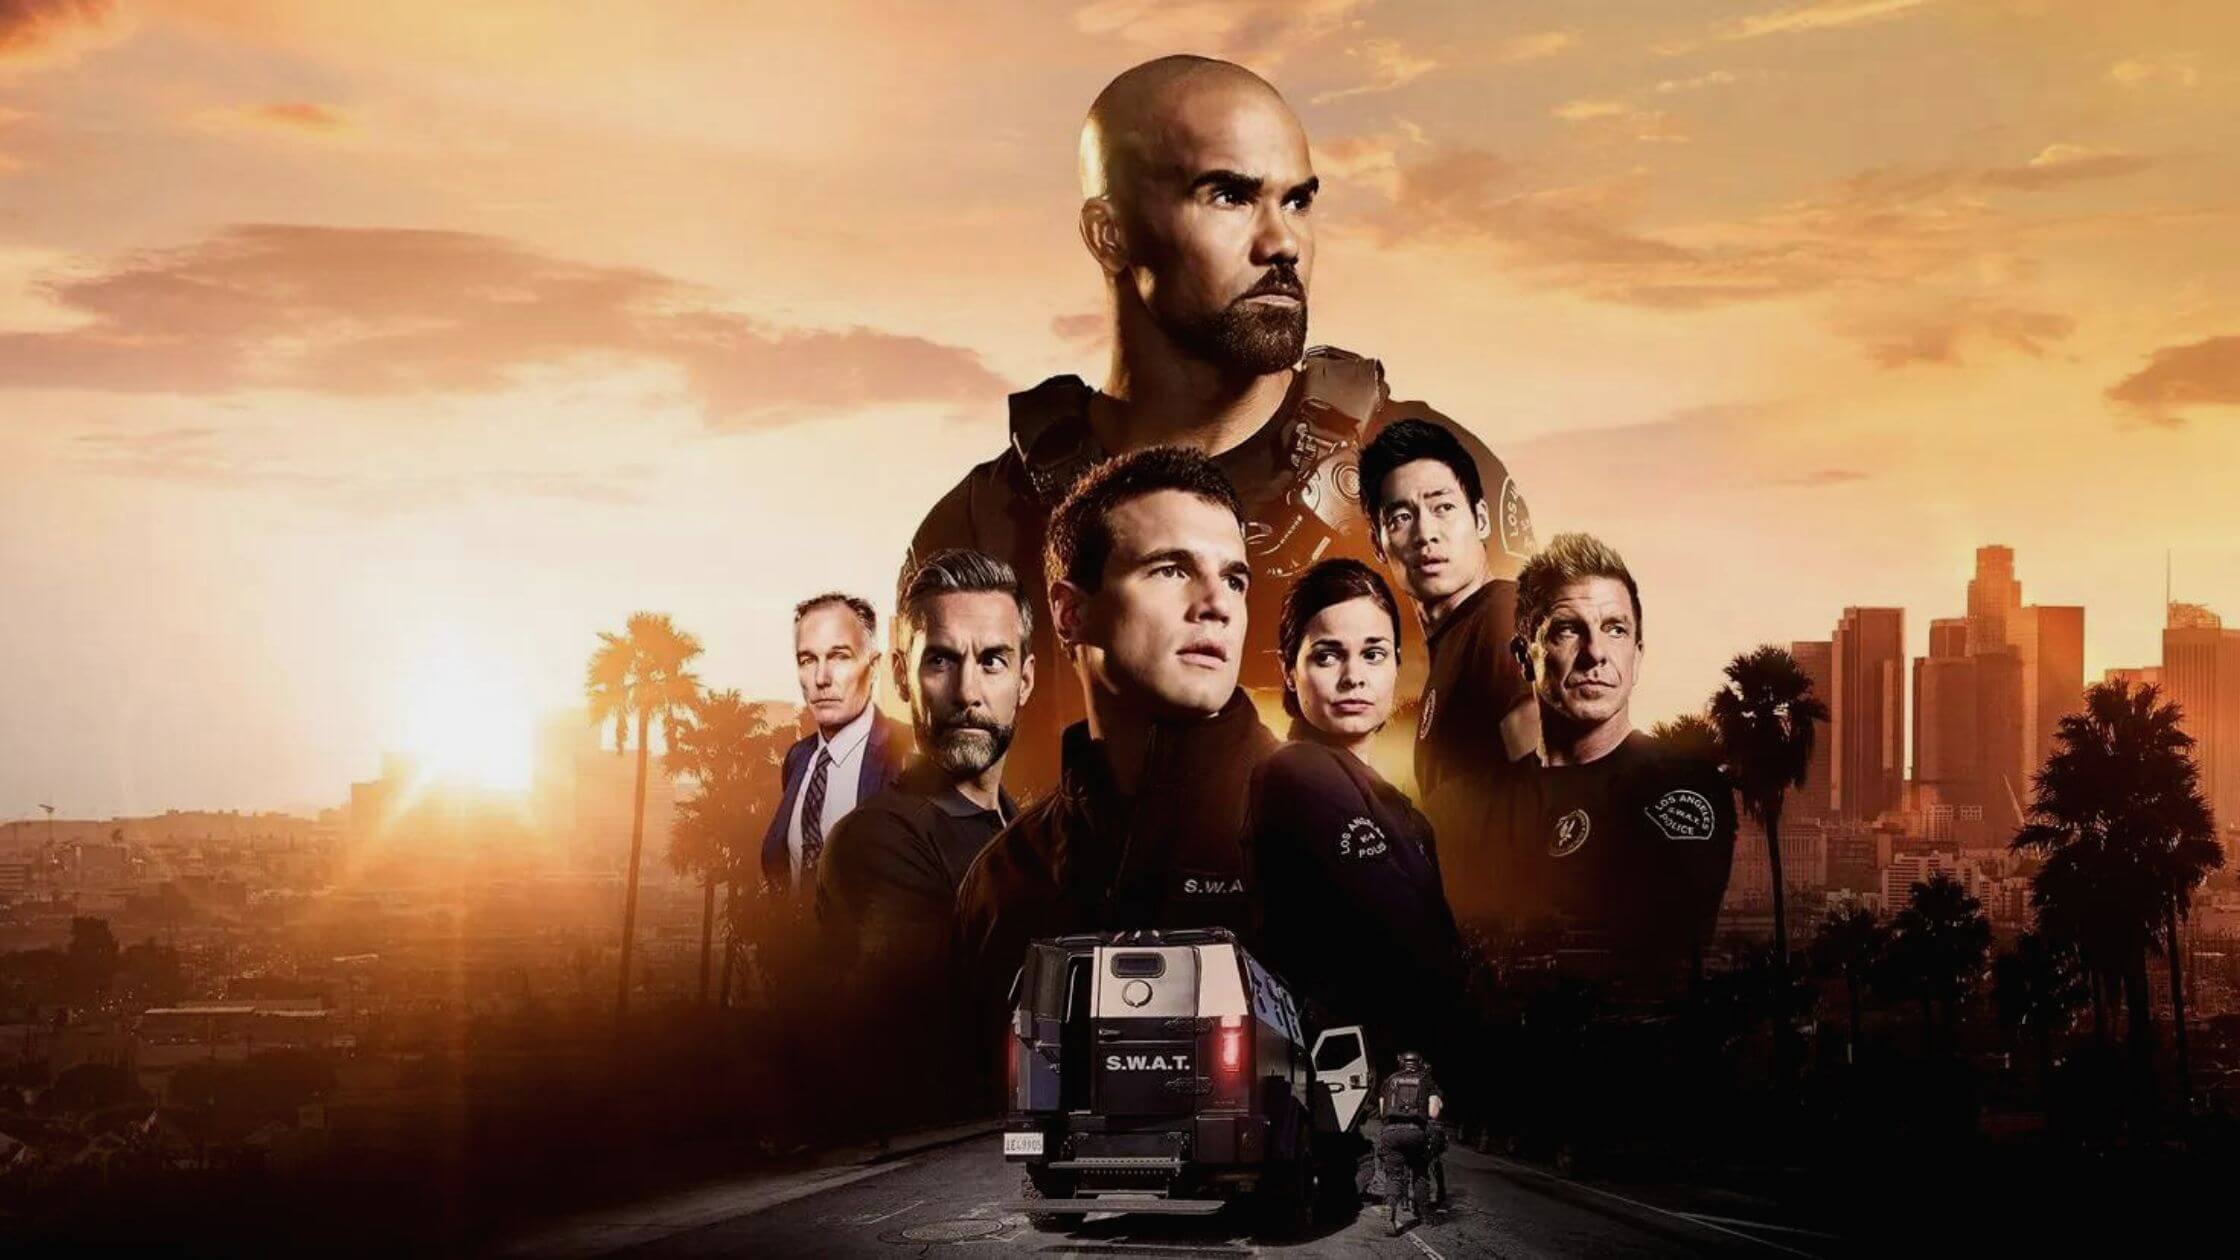 S.W.A.T. Season 6 Confirmed Release Date, Plot, Trailer, And More!